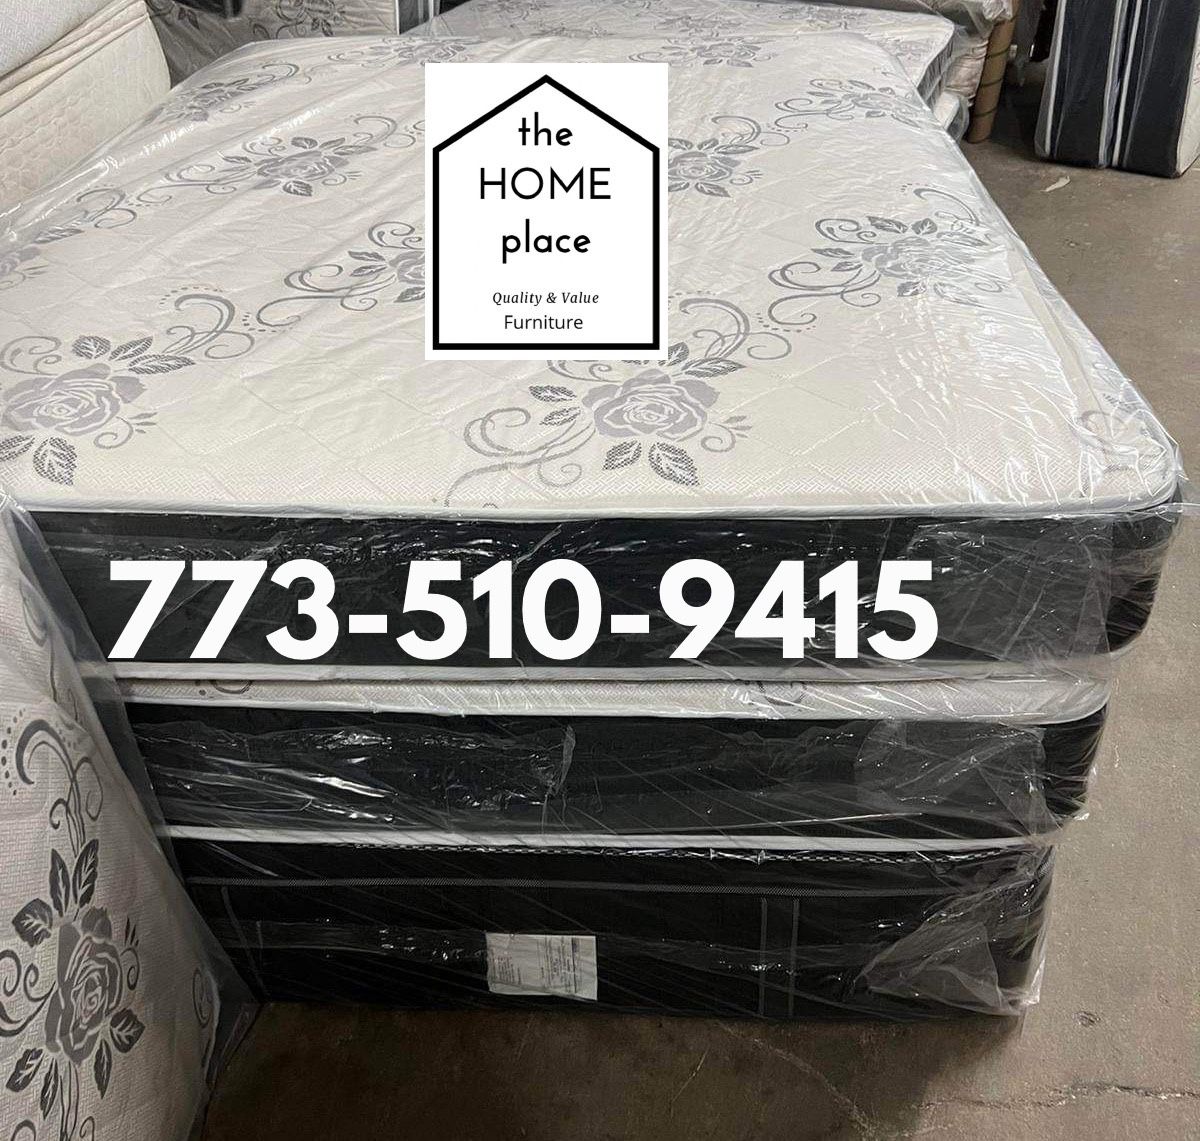 The HOME Place Super Sale!! 🚨 Brand NEW Mattresses, Available In ALL Sizes Ready For Delivery 🚛  ( Starting Price $99) 